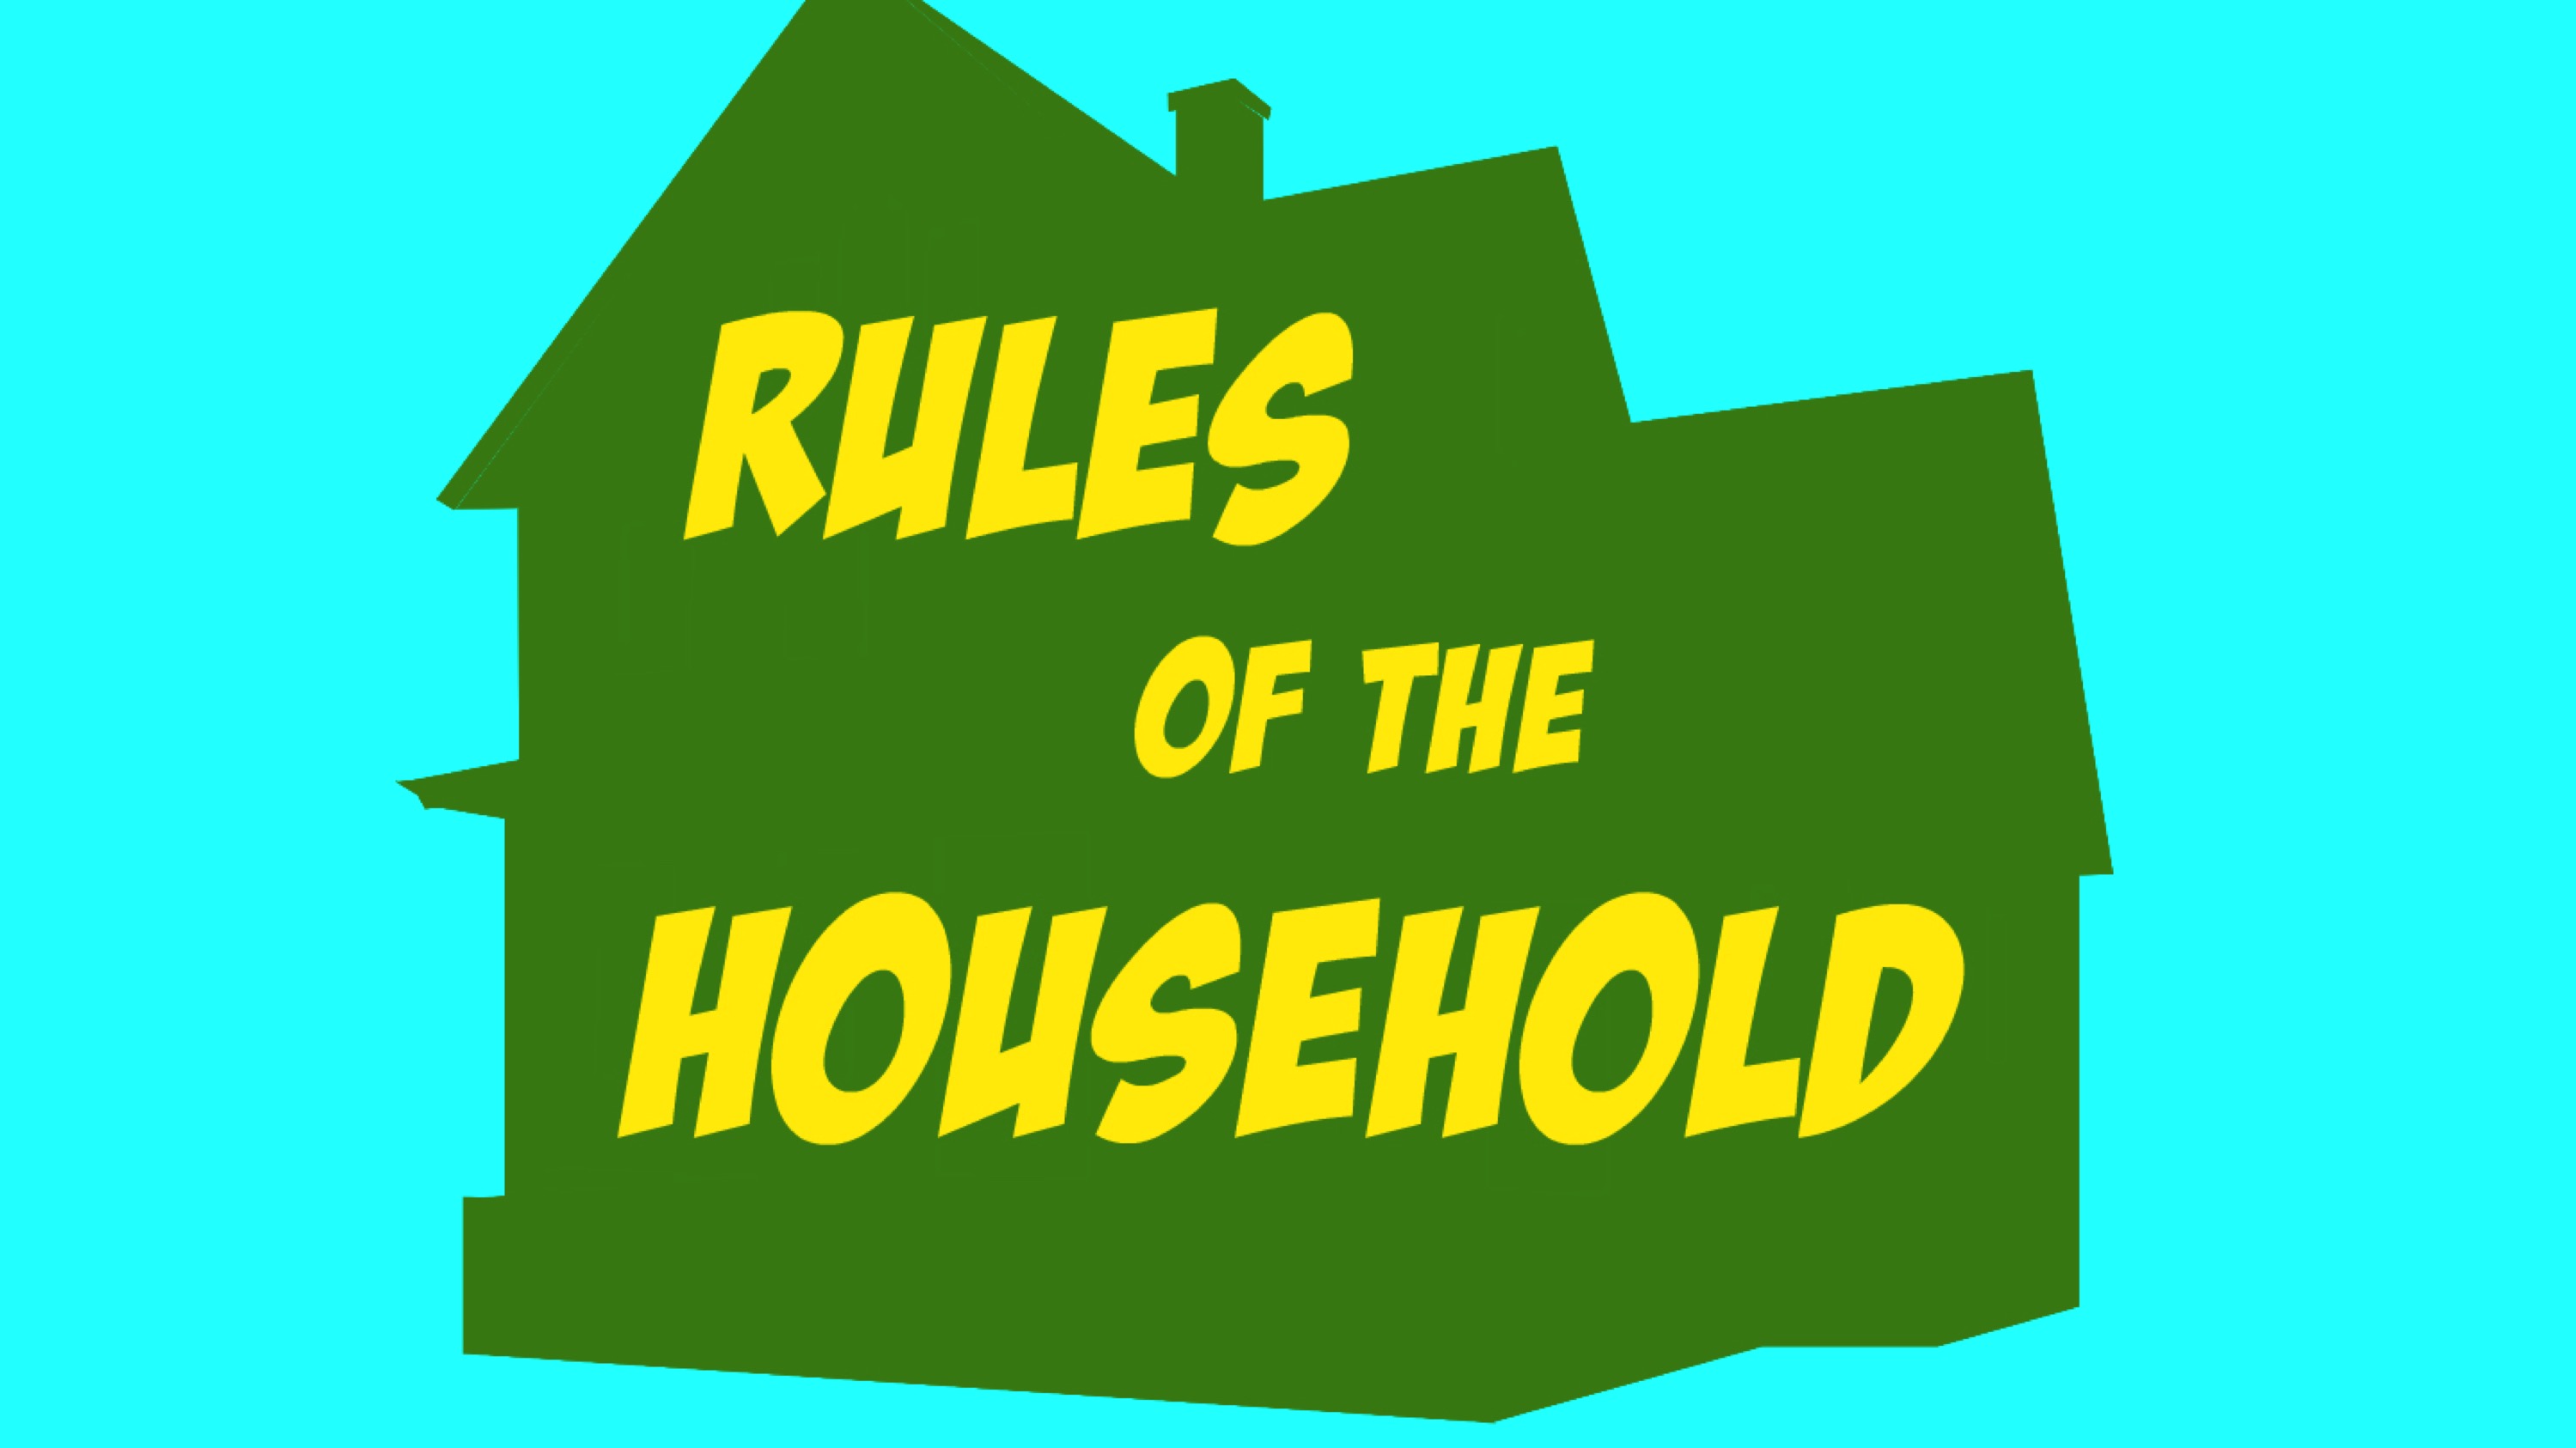 Ryan Post - "Rules of the Household"